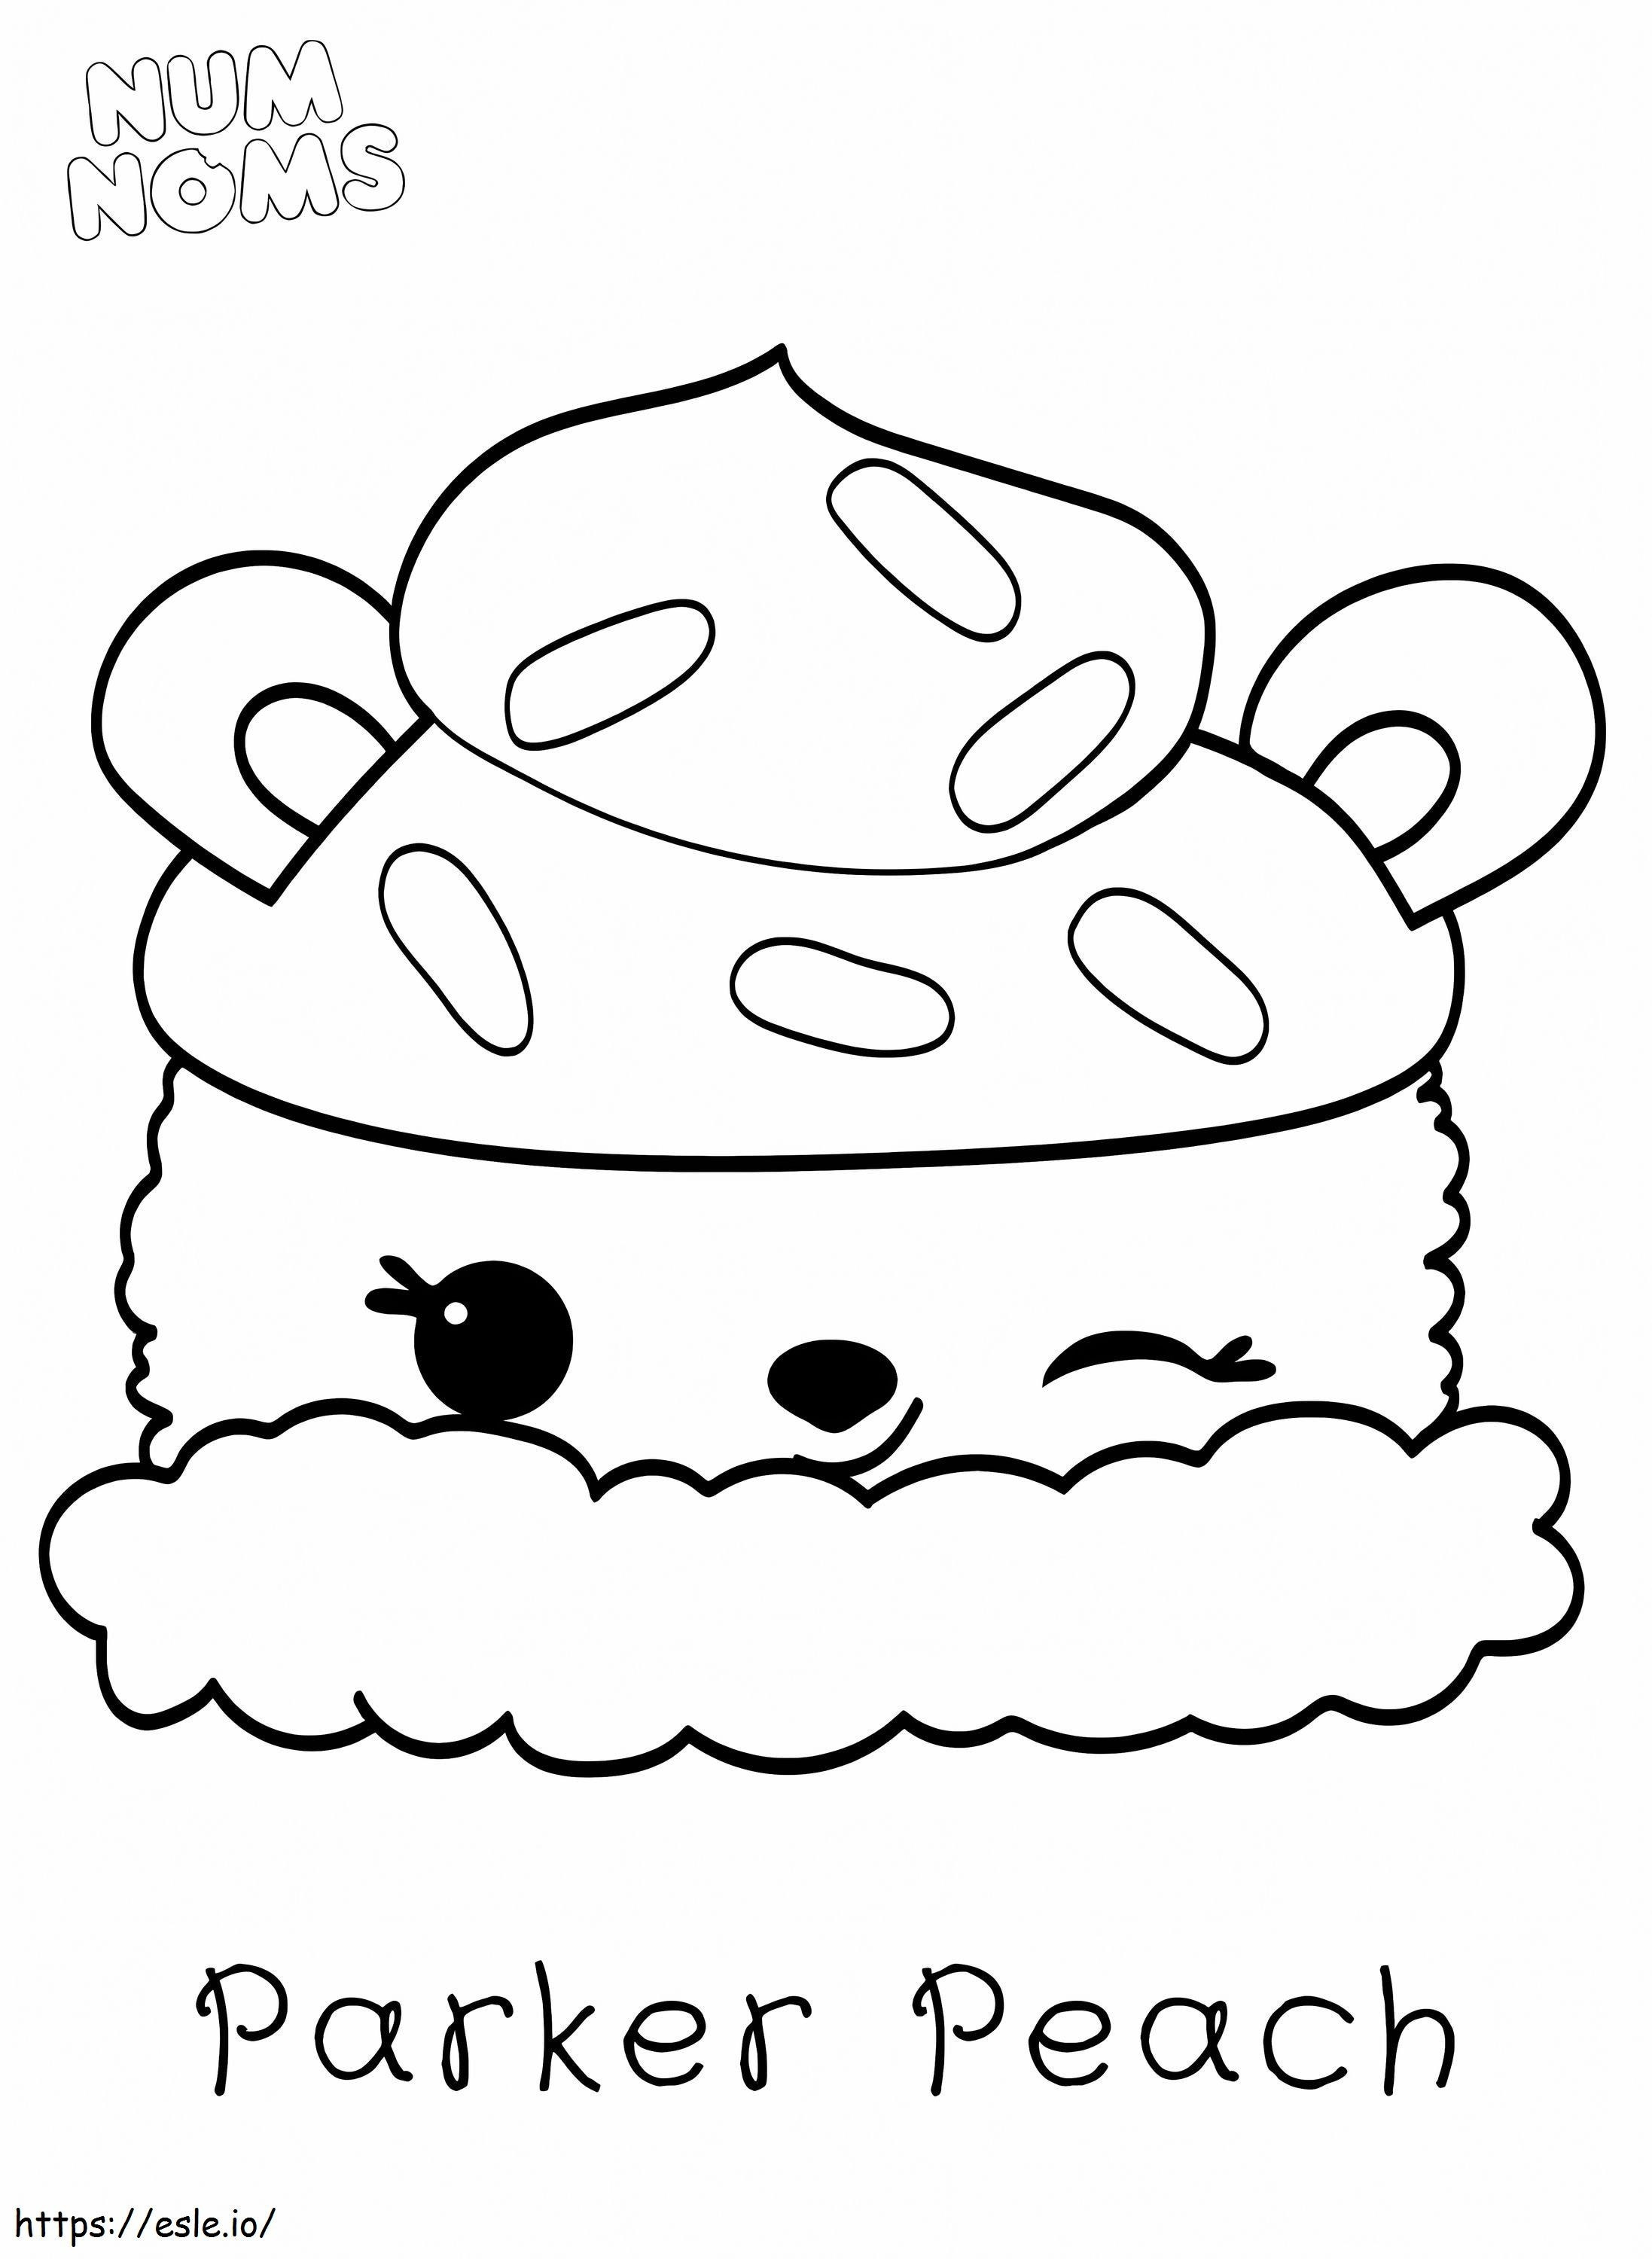 Smiling Paker Peach In Num Noms coloring page